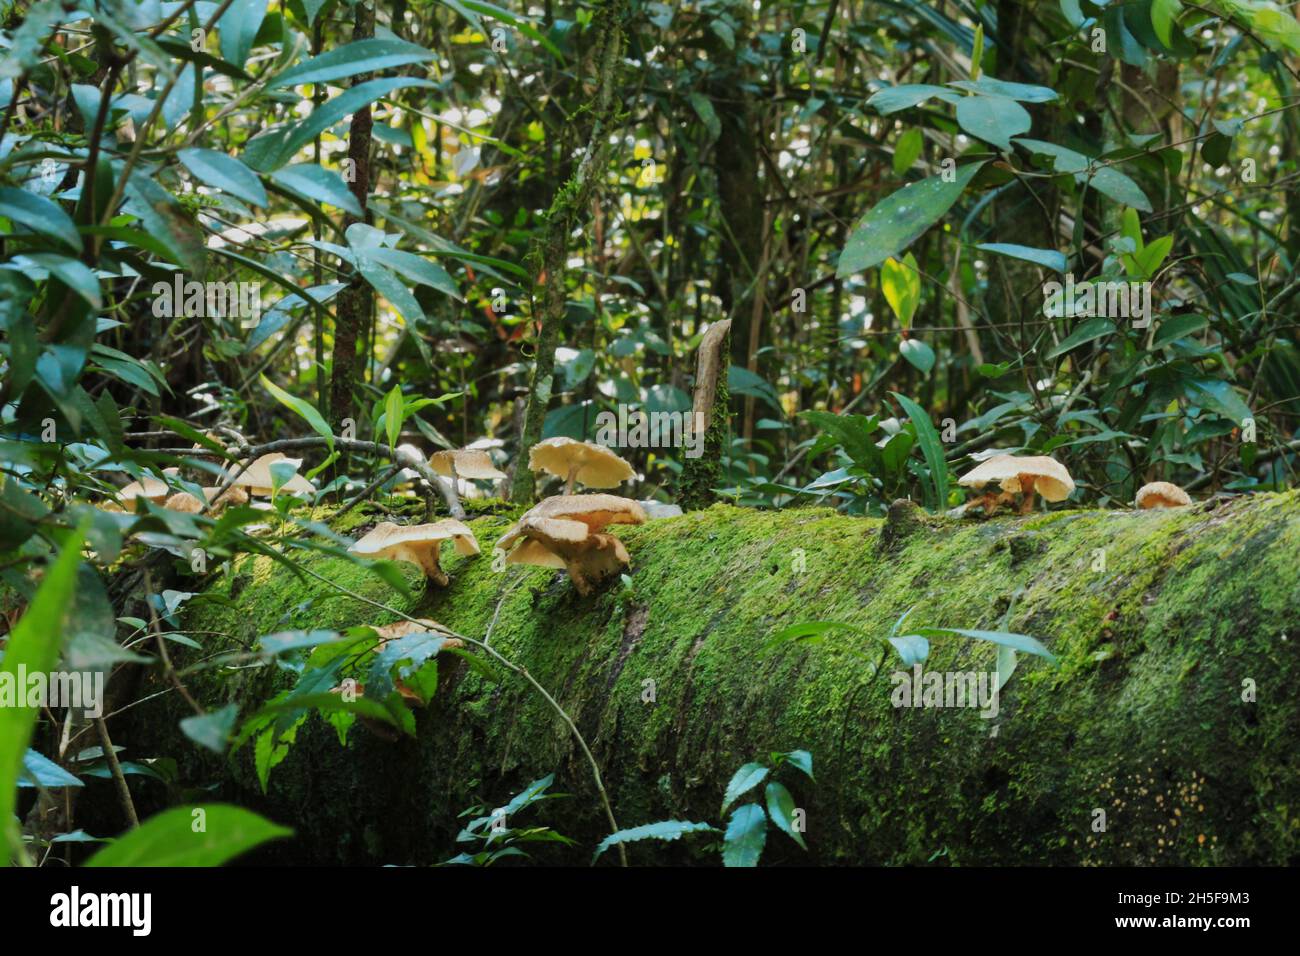 The fallen trunks and their vegetation in the middle of the Atlantic Forest. The life that arises in decomposition. Stock Photo